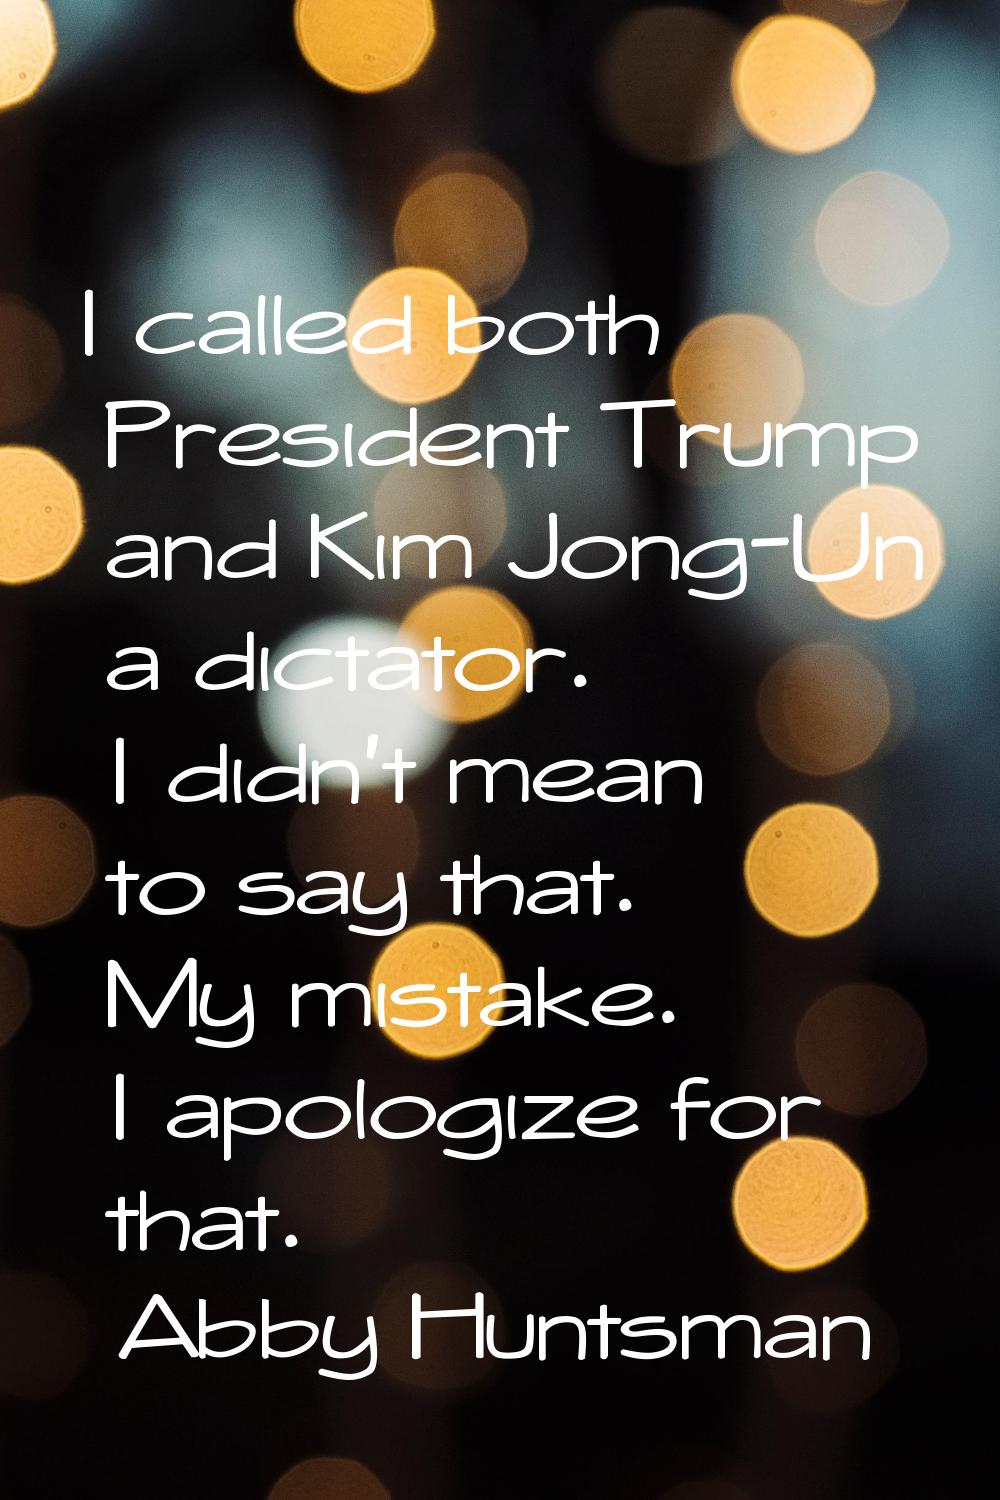 I called both President Trump and Kim Jong-Un a dictator. I didn't mean to say that. My mistake. I 